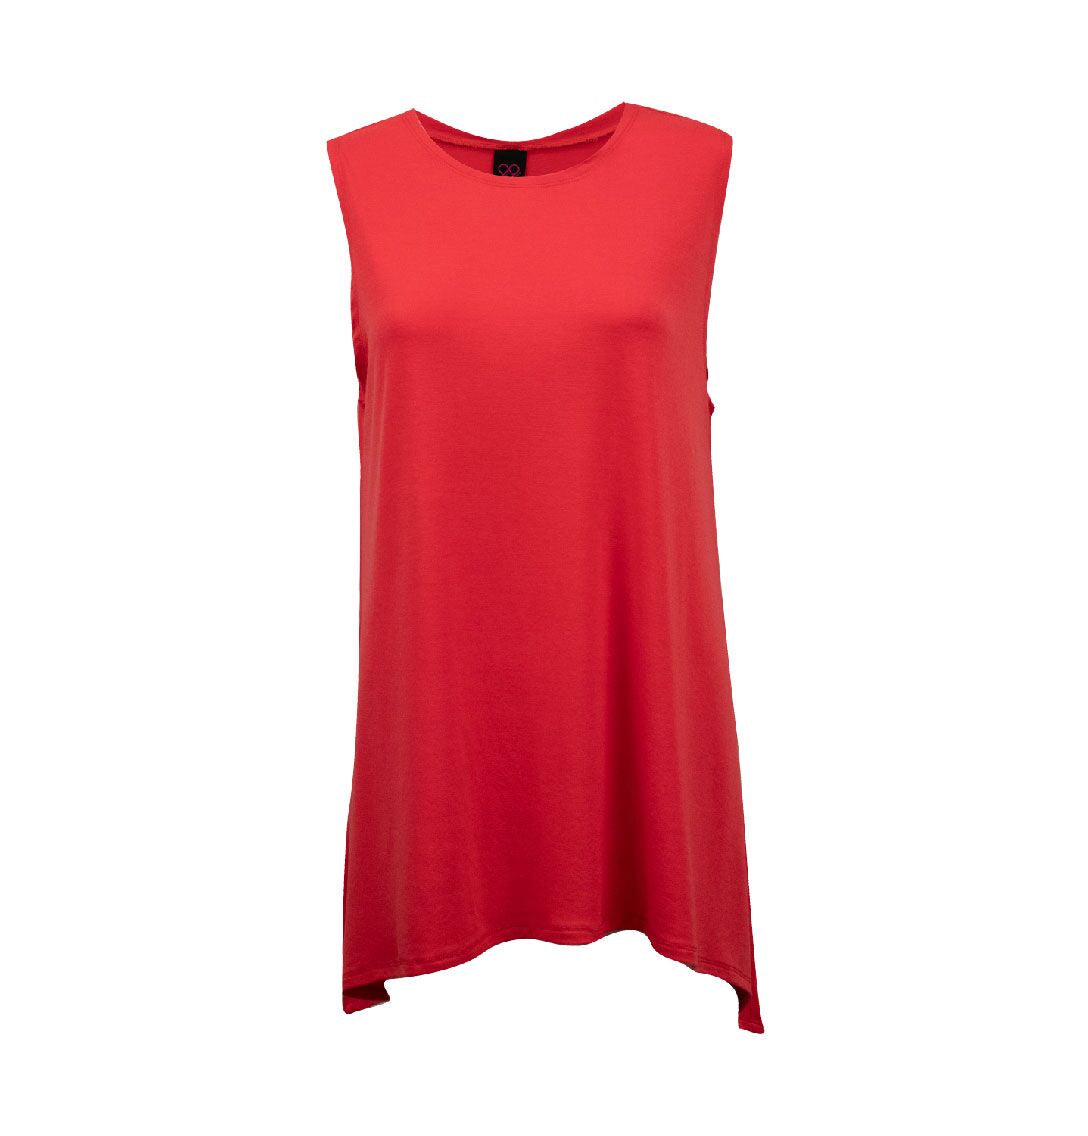 tank-top-womens-active-wear-red